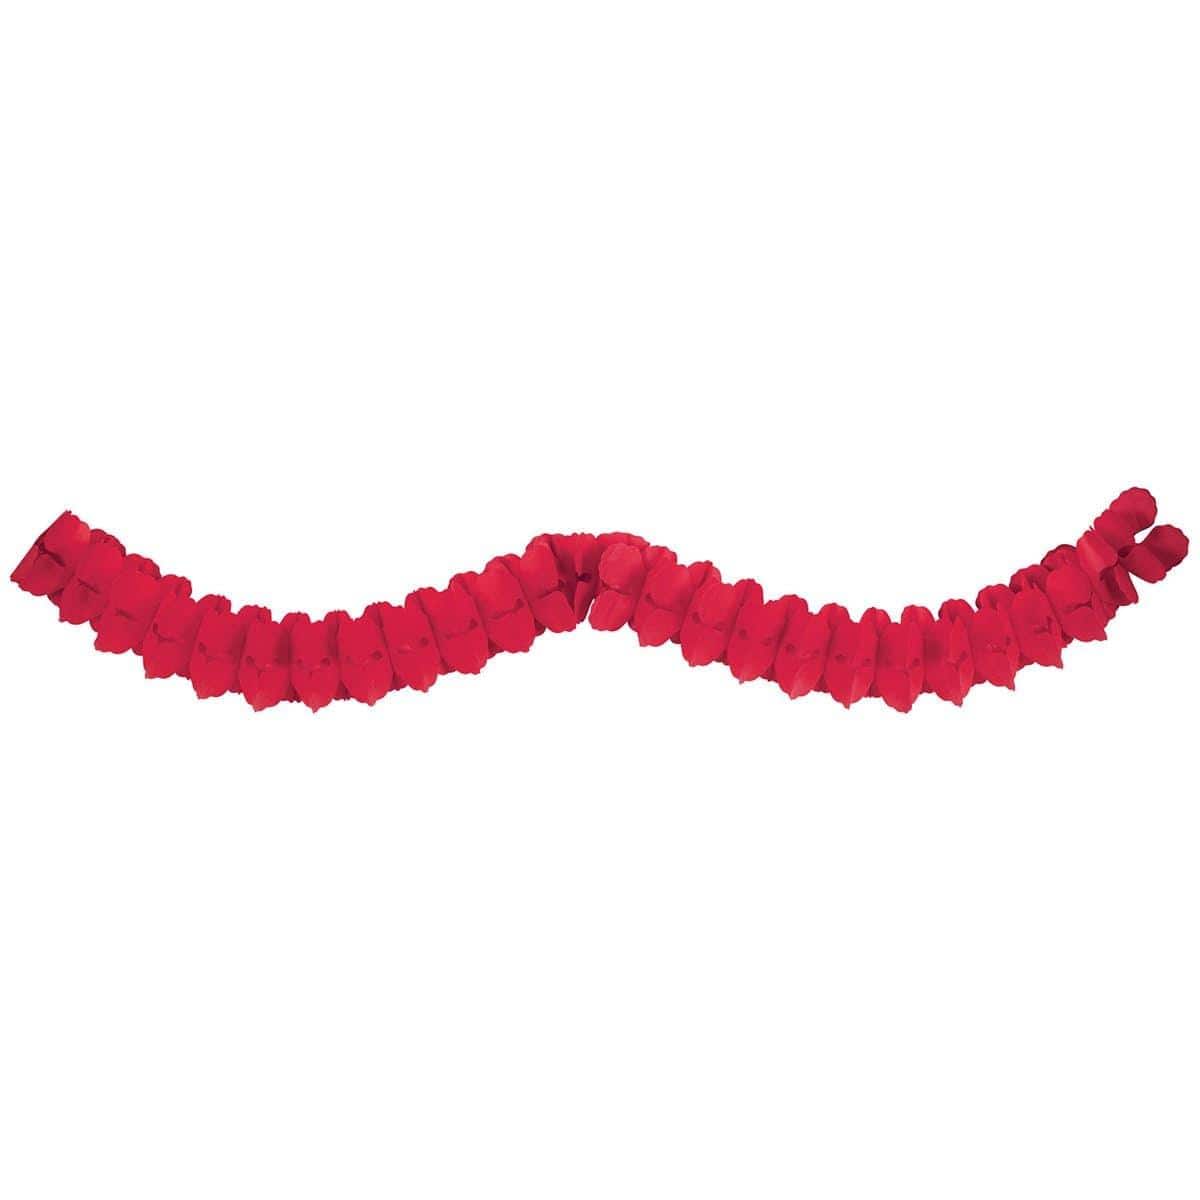 Buy Decorations Paper Garland - Red sold at Party Expert